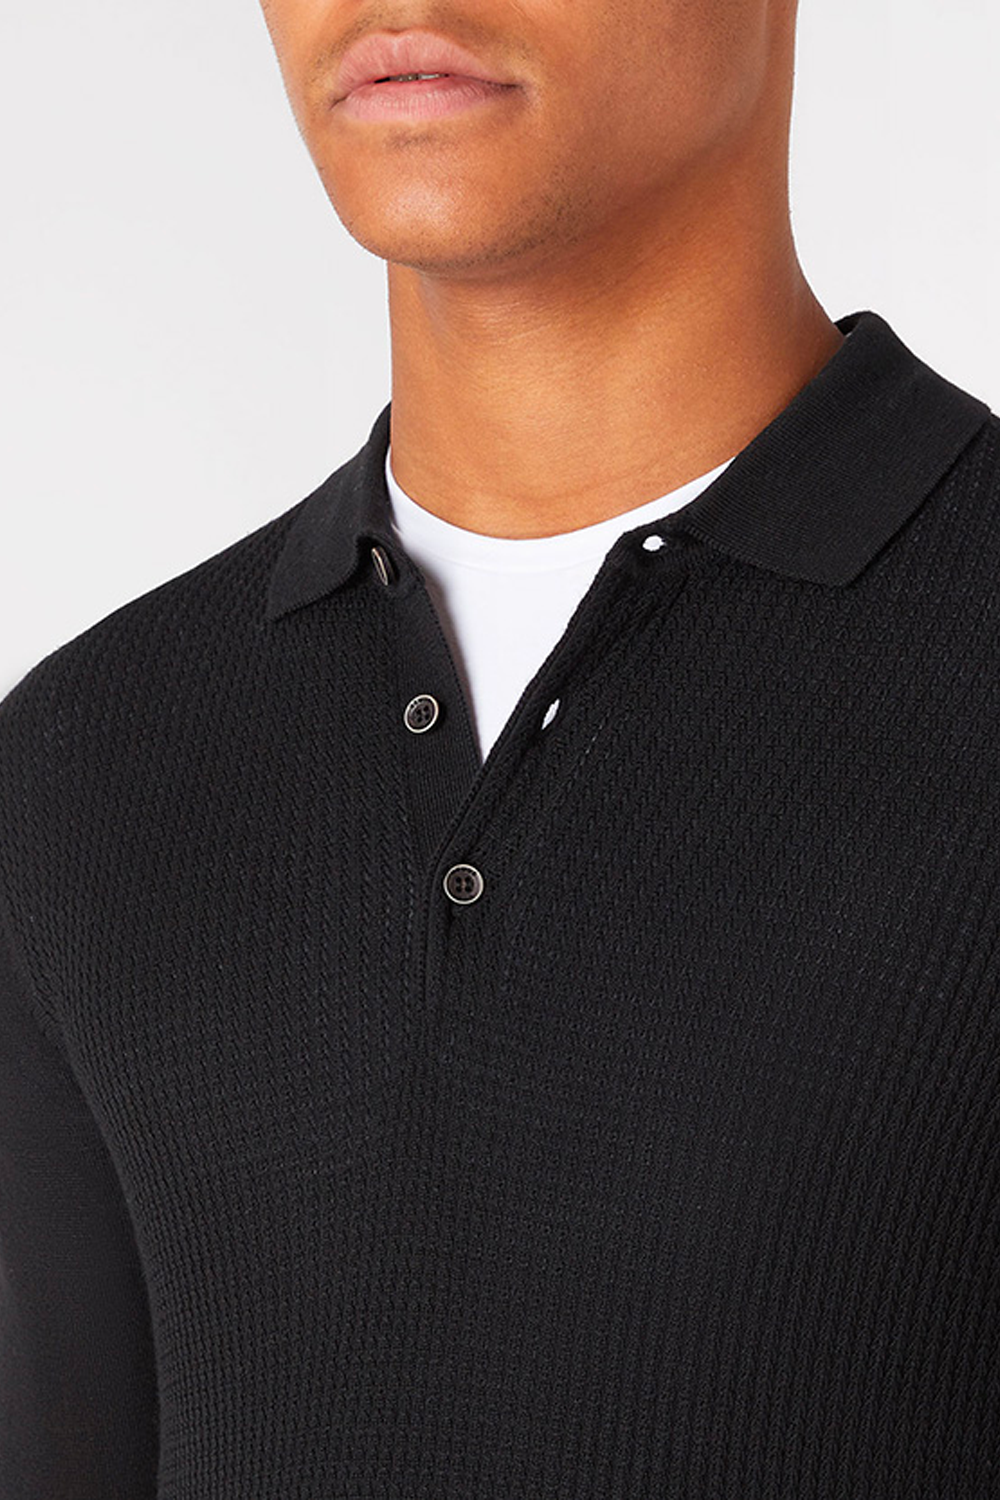 Buy the Remus Uomo Merino Wool-Blend L/S Knitted Polo Black at Intro. Spend £50 for free UK delivery. Official stockists. We ship worldwide.